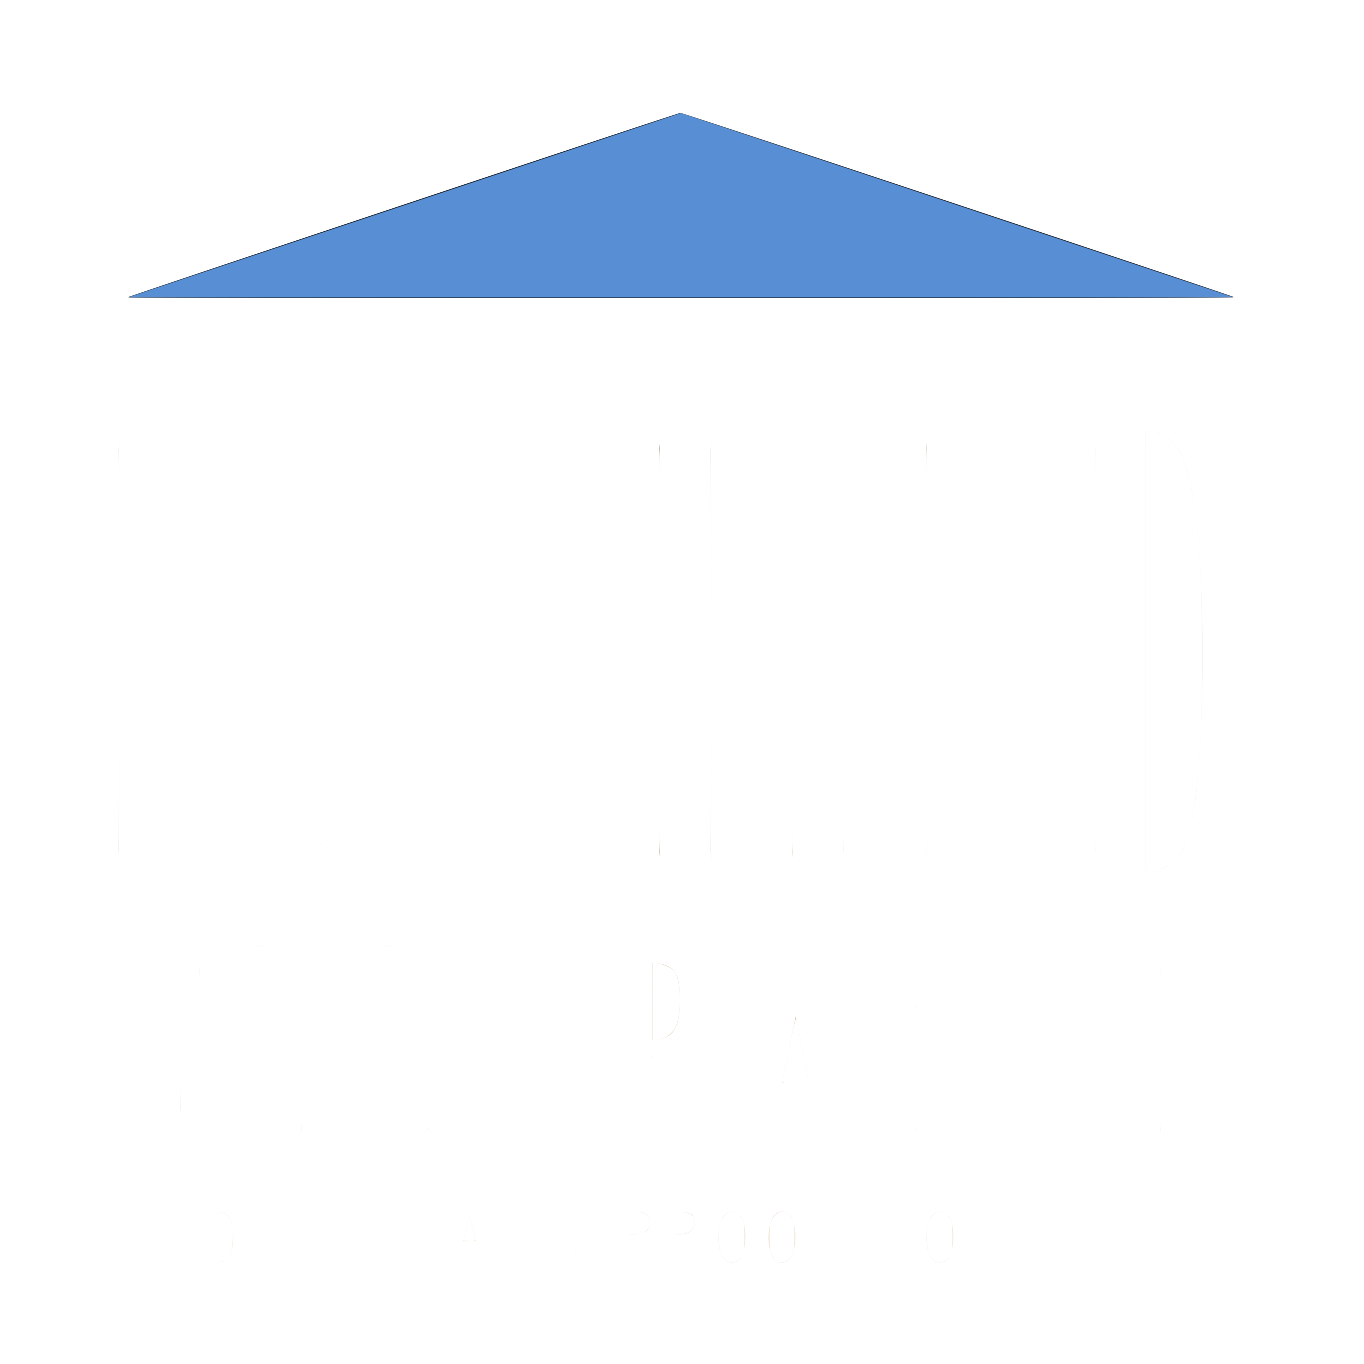 Excited Utterance